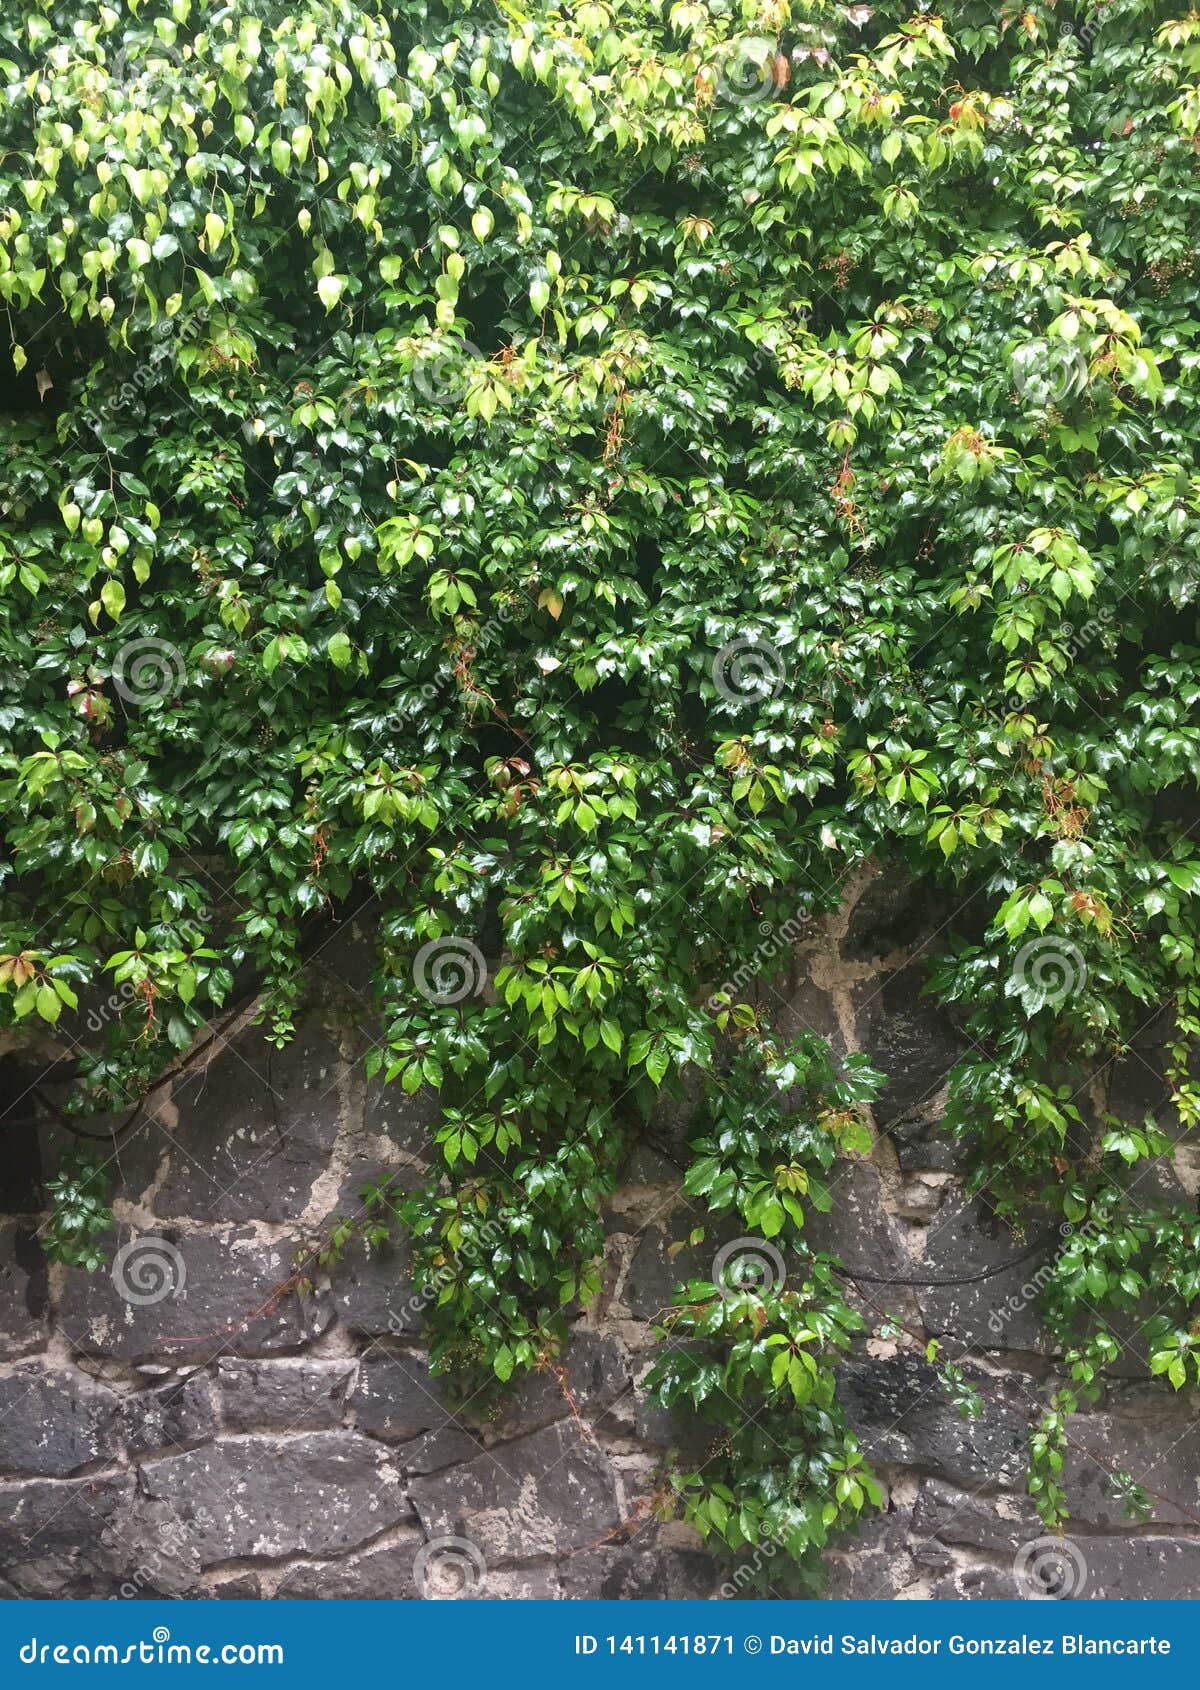 wall of stone, life of the green creeper